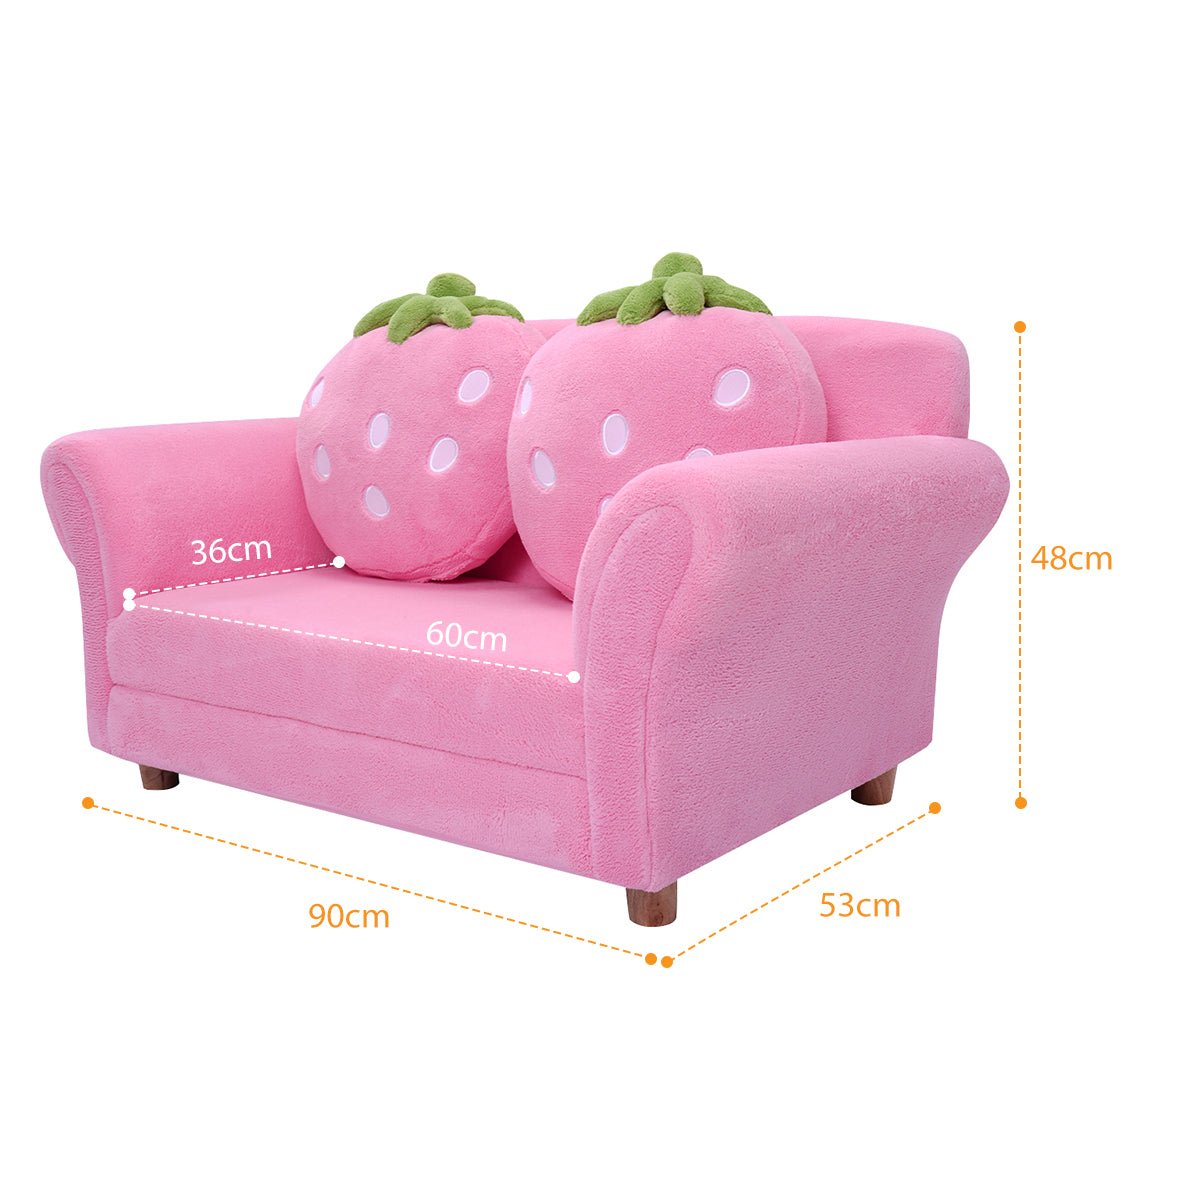 Kids Lounge Bed: 2-Seat Sofa with Cute Strawberry Pillows for Comfort